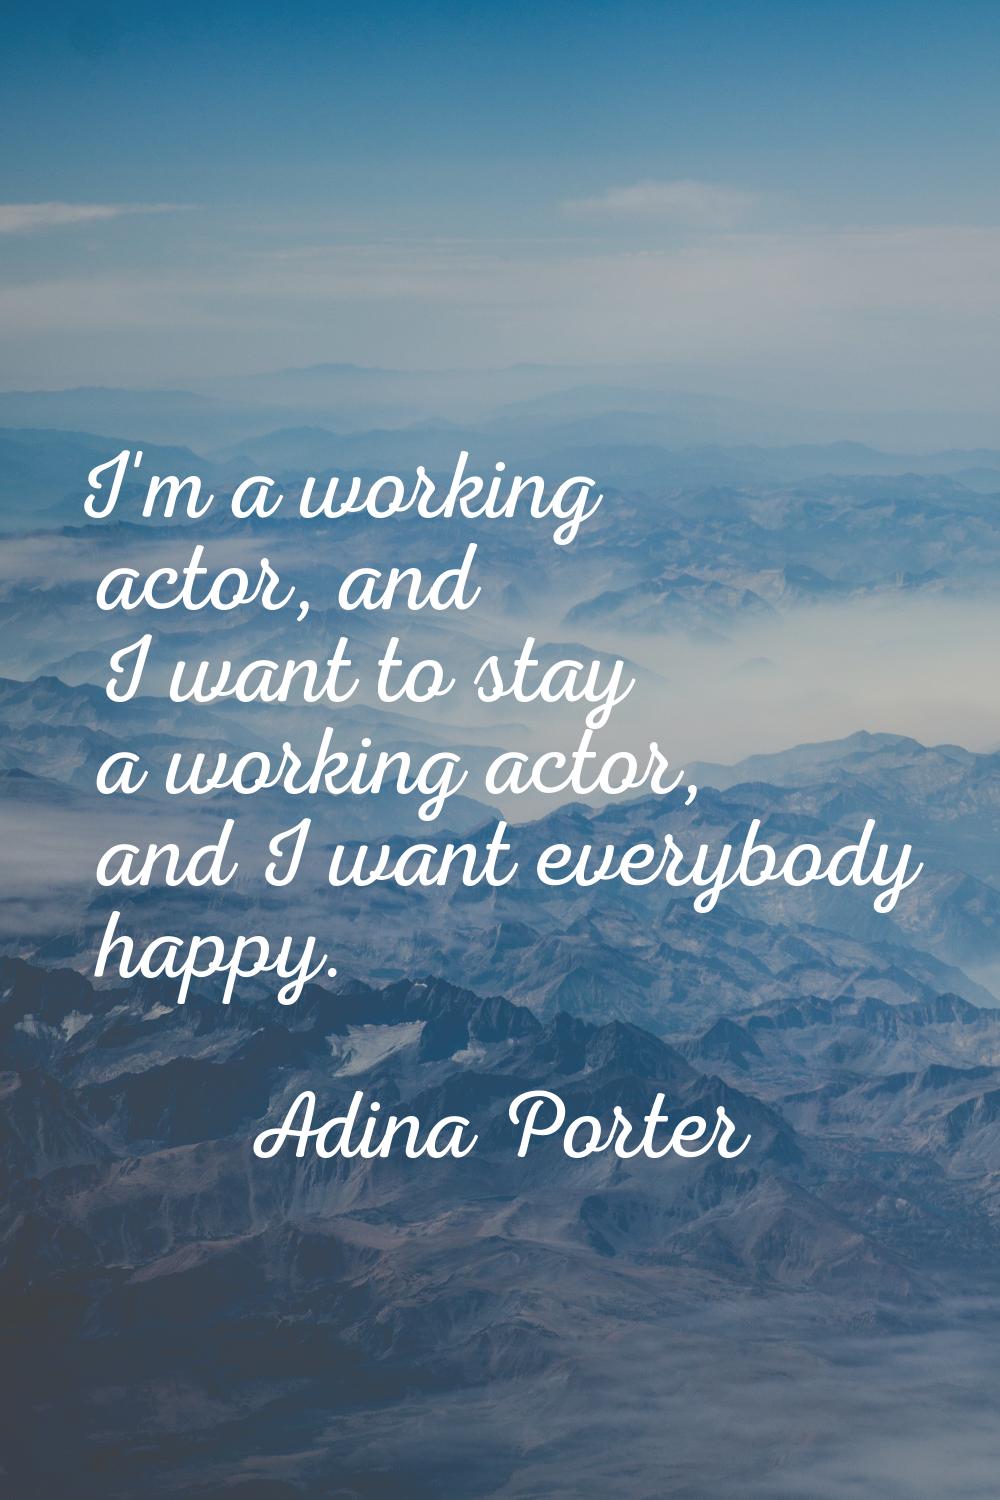 I'm a working actor, and I want to stay a working actor, and I want everybody happy.